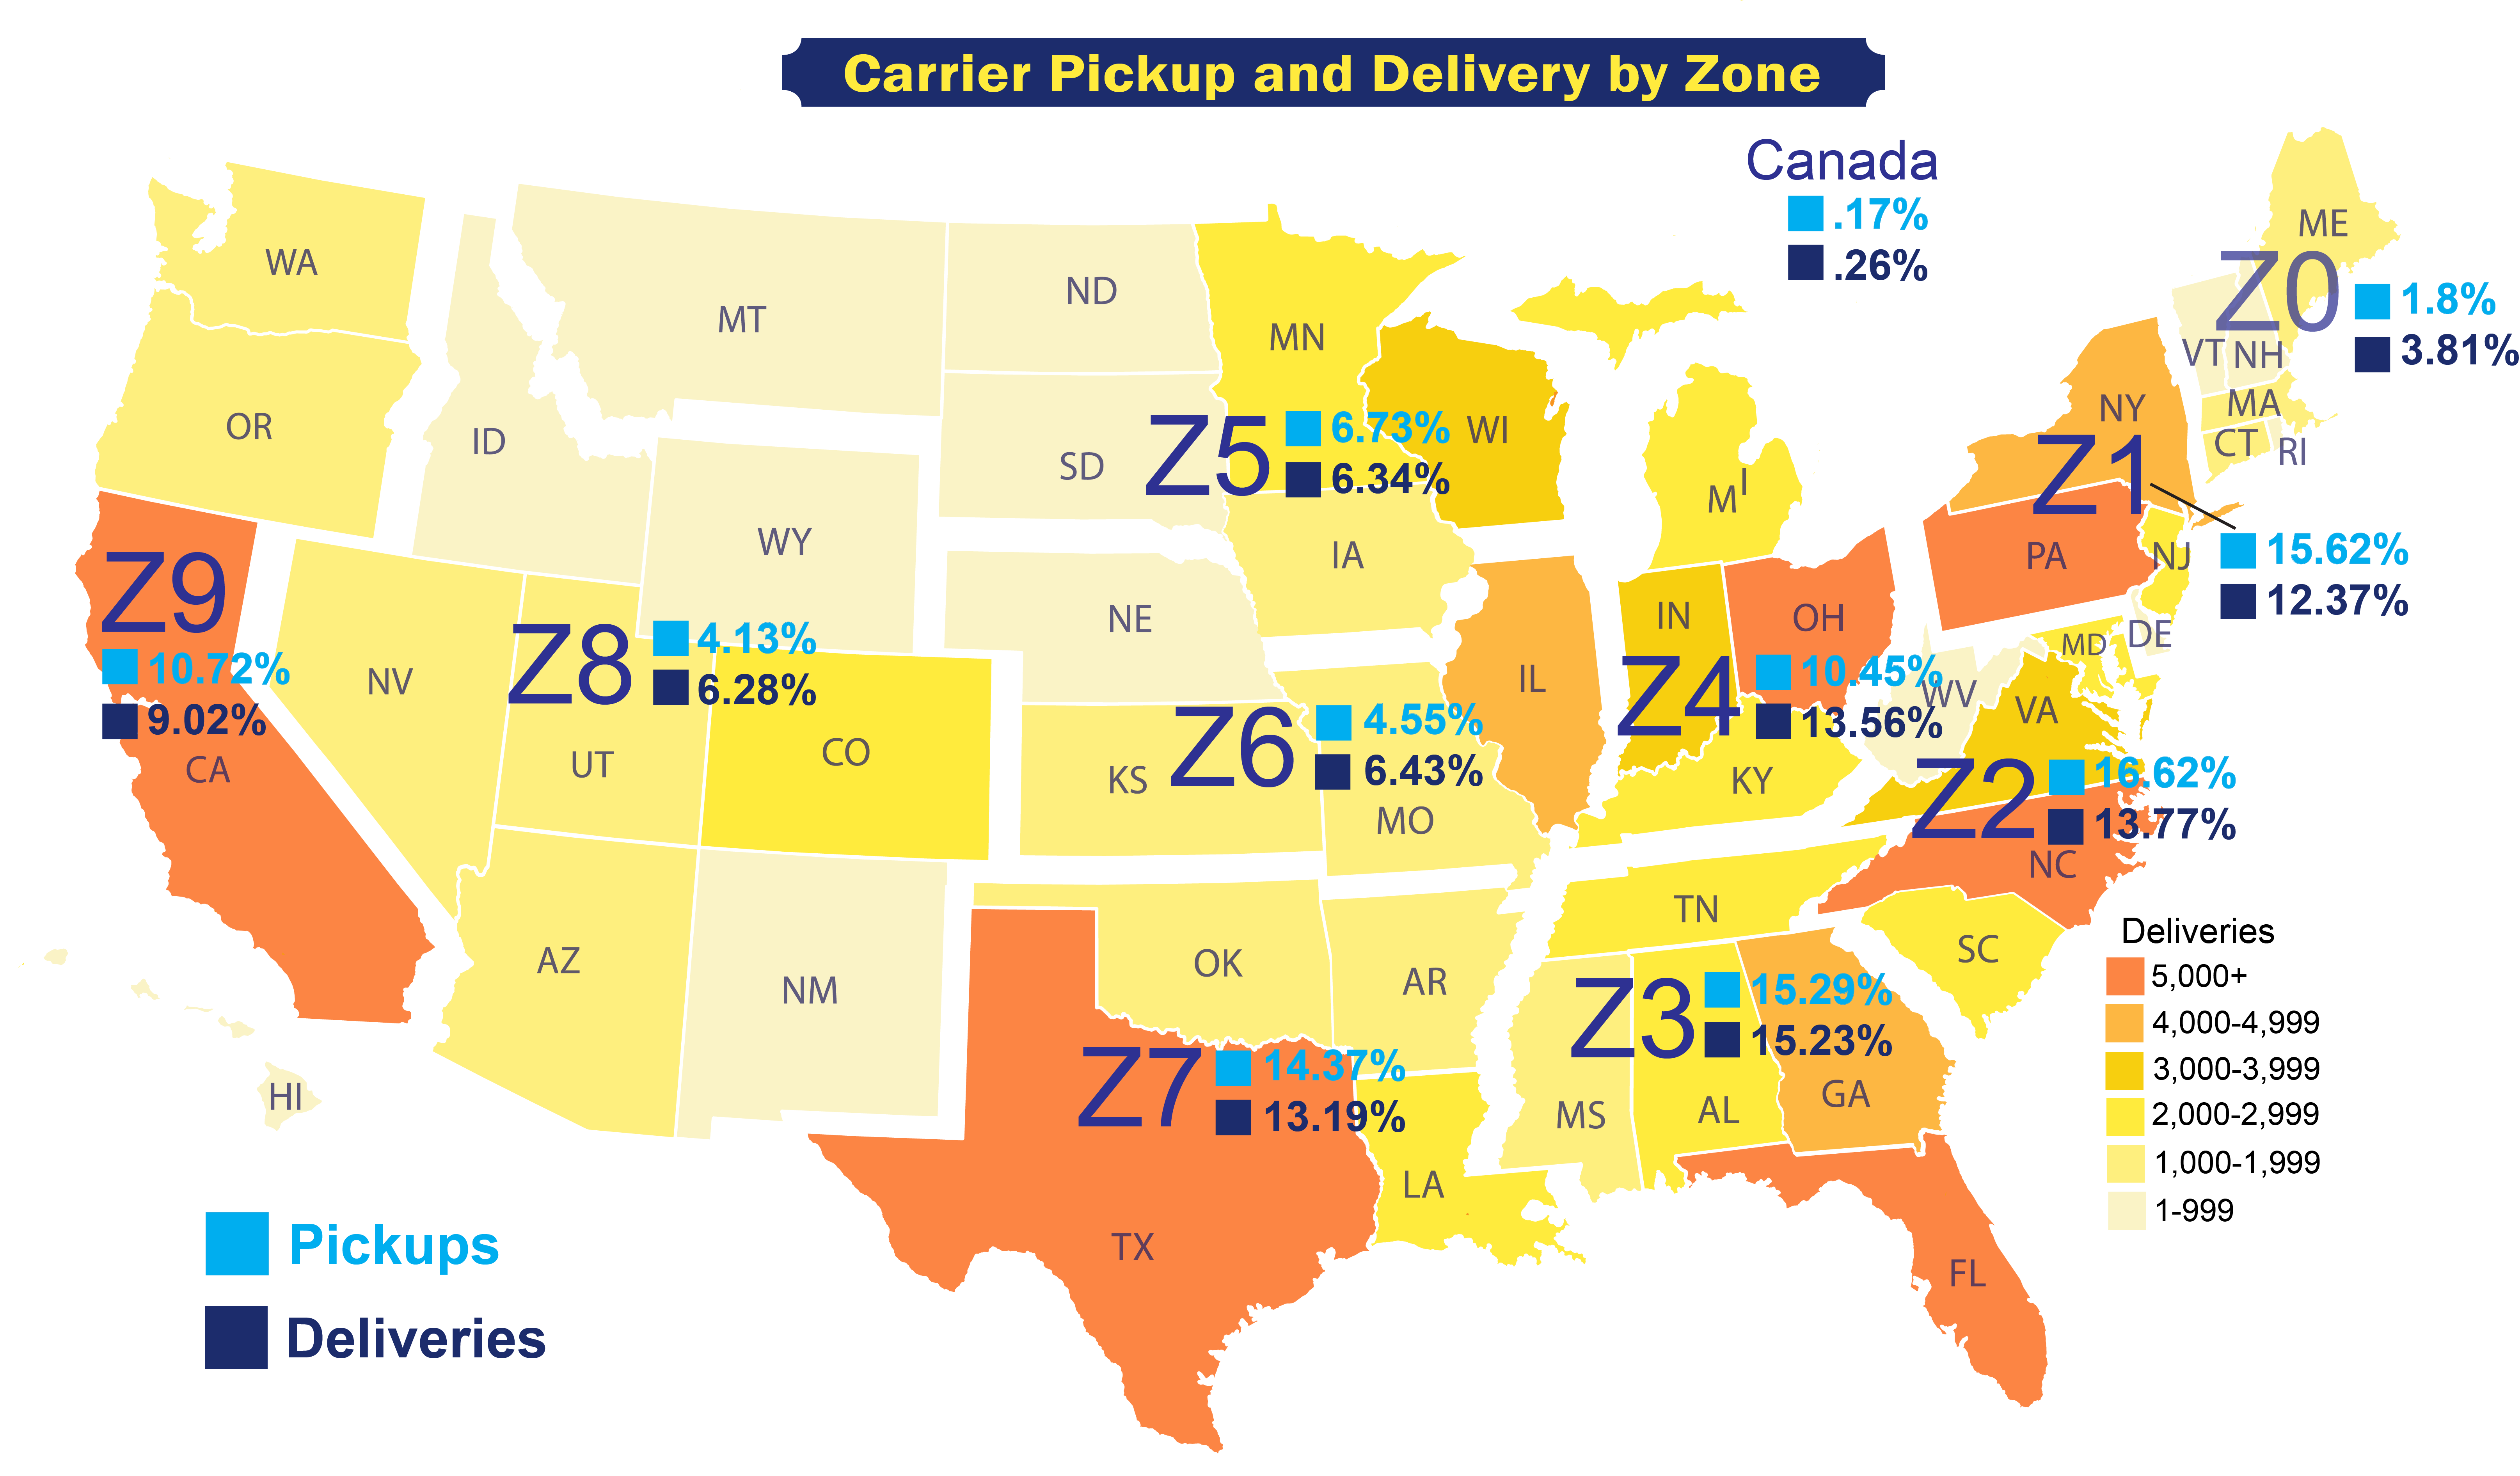 Continental United States, Hawaii and Canada. Carrier Pickup and Delivery by Zone. Zone 0: Maine, Vermont, New Hampshire, Massachussetts, Connecticut, Rhode Island; Pickups 1.8%, Deliveries 3.81%. Zone 1: New York, Pennsylvania, New Jersey; Pickups 15.62%, Deliveries 12.37%. Zone 2: West Virginia, Virginia, North Carolina, South Carolina; Pickups 16.62%, Deliveries 13.77%. Zone 3: Tennessee, Mississippi, Alabama, Georgia, Florida; Pickups 15.29%, Deliveries 15.23%. Zone 4: Michigan, Indiana, Ohio, Kentucky; Pickups 10.45%, Deliveries 13.56%. Zone 5: Montana, North/South Dakota, Minnesota, Wisconsin, Iowa; Pickups 6.73%, Deliveries 6.34%. Zone 6: Nebraska, Kansas, Missouri, Illinois; Pickups 4.55%, Deliveries 6.43%. Zone 7: Texas, Oklahoma, Arkansas, Louisiana; Pickups 14.37%, Deliveries 13.19%. Zone 8: Idaho, Nevada, Utah, Wyoming, Colorado, Arizona, New Mexico; Pickups 4.13%, Deliveries 6.28%. Zone 9: Washington, Oregon, California, Hawaii; Pickups 10.72%, Deliveries 9.02%. Canada: Pickups .17%, Deliveries .26%.